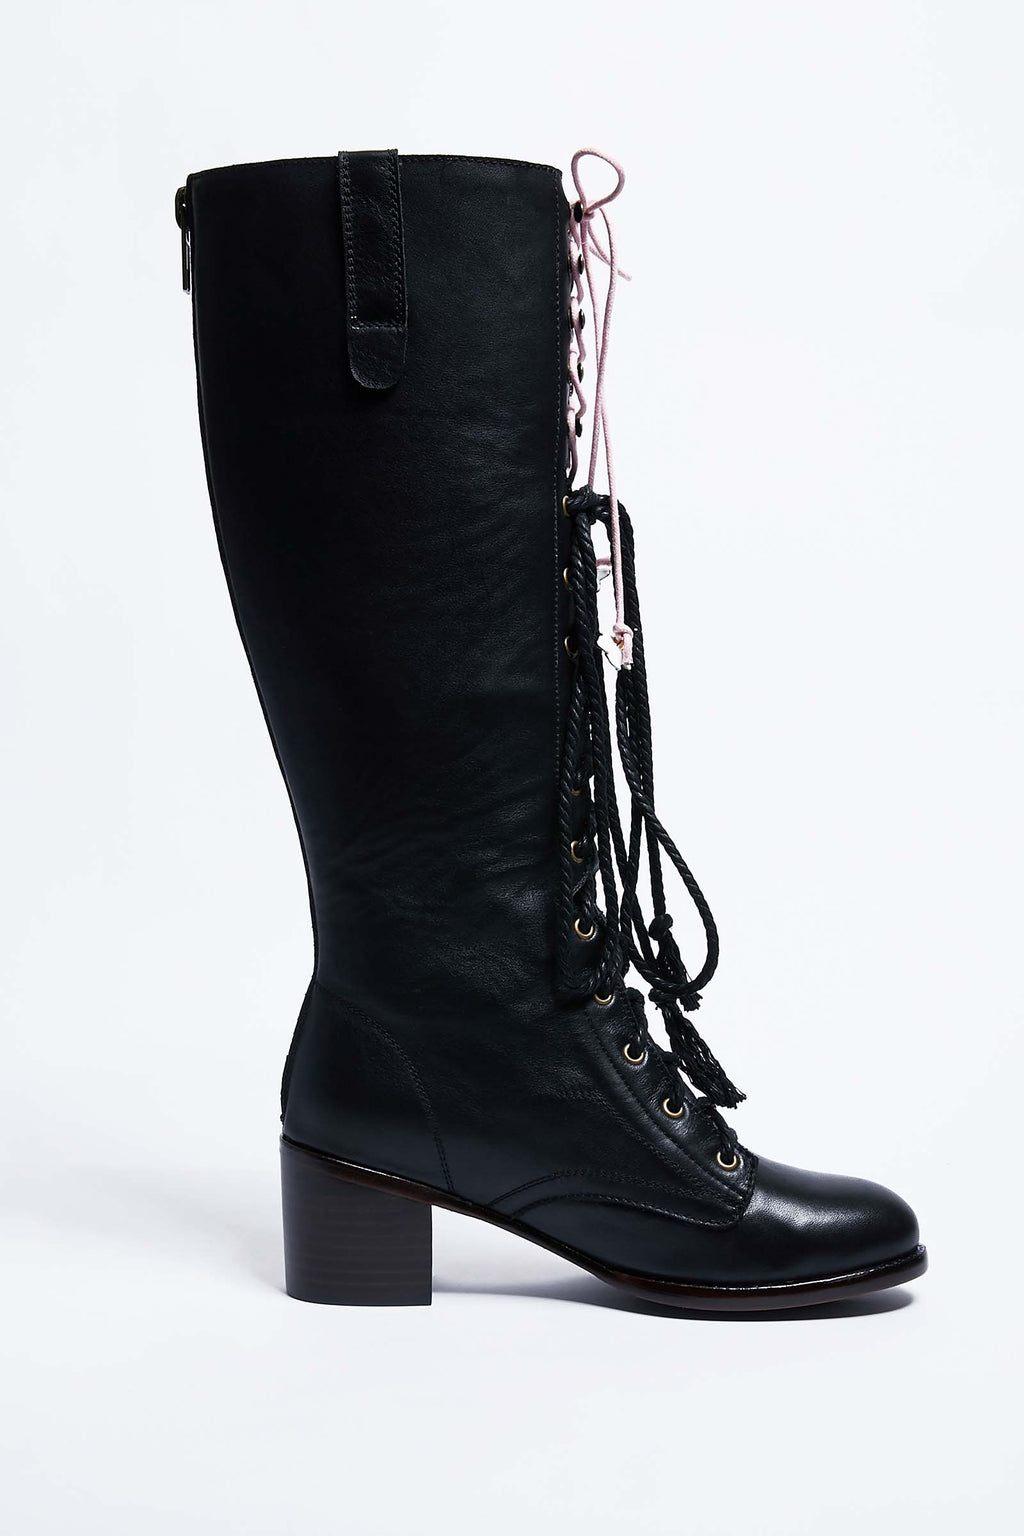 Black High Cherry Blossom Embroidered Leather Boots